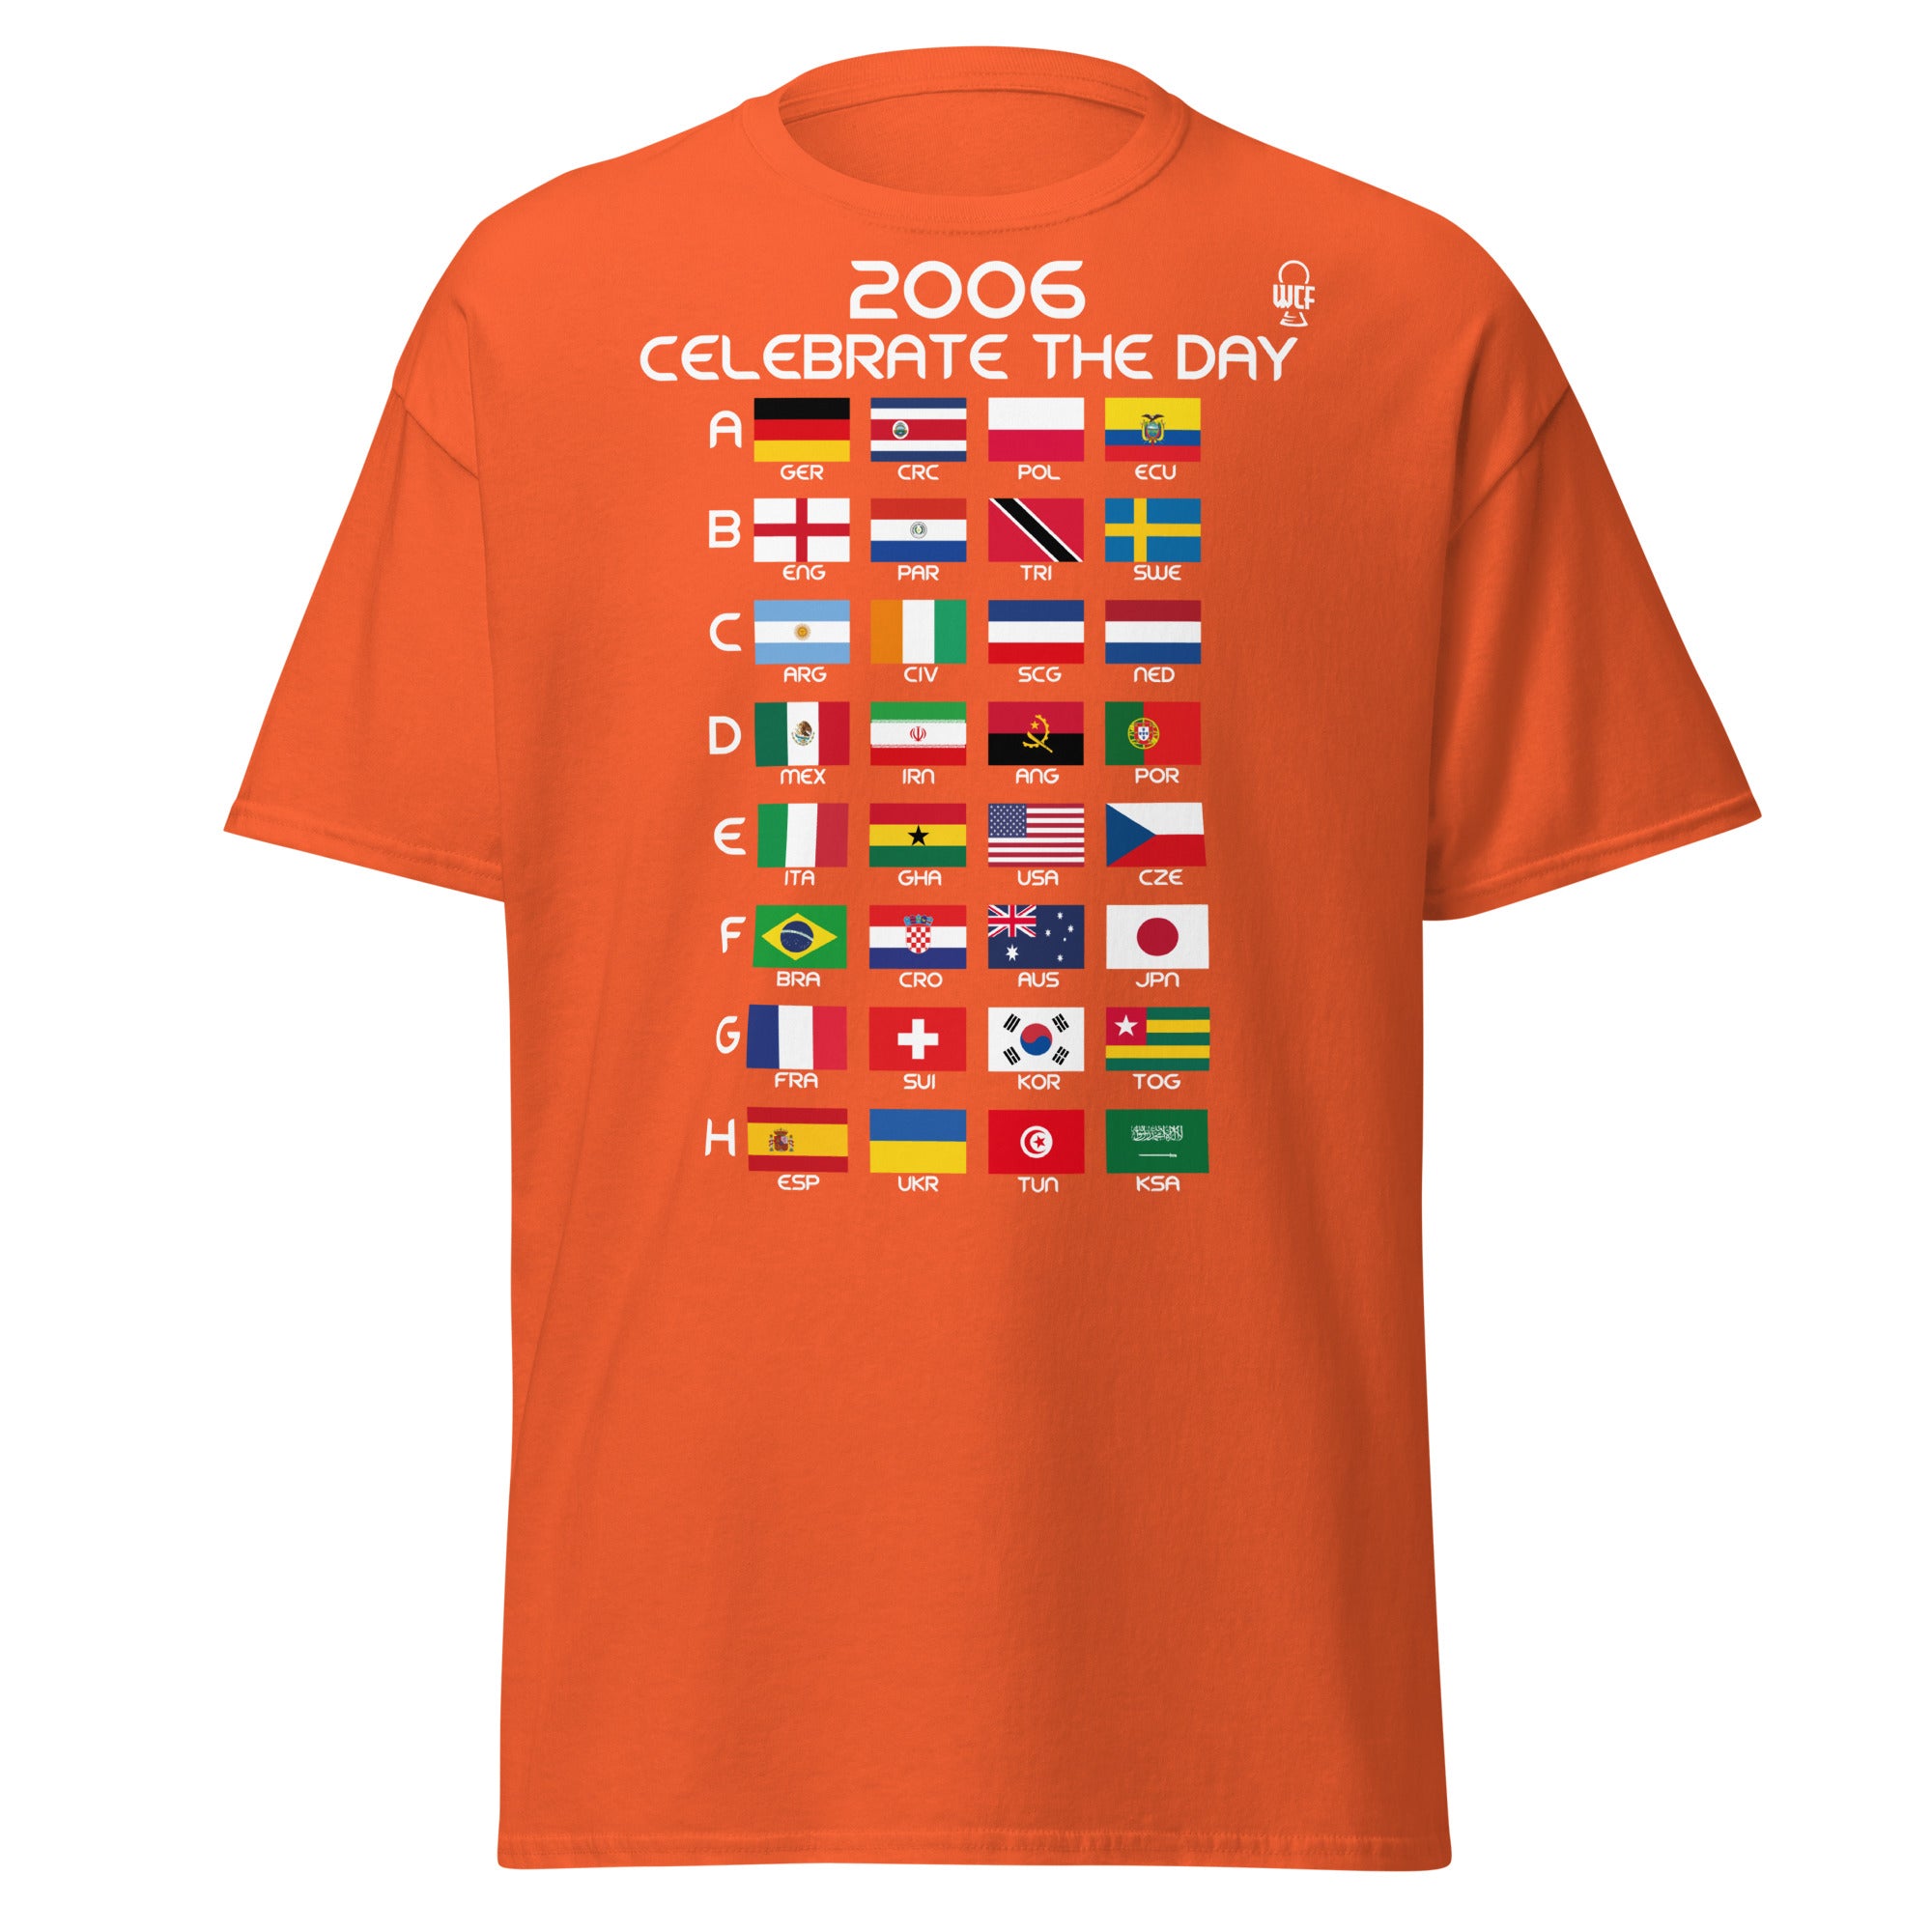 FIFA World Cup Germany 2006 Classic T-Shirt - CELEBRATE THE DAY